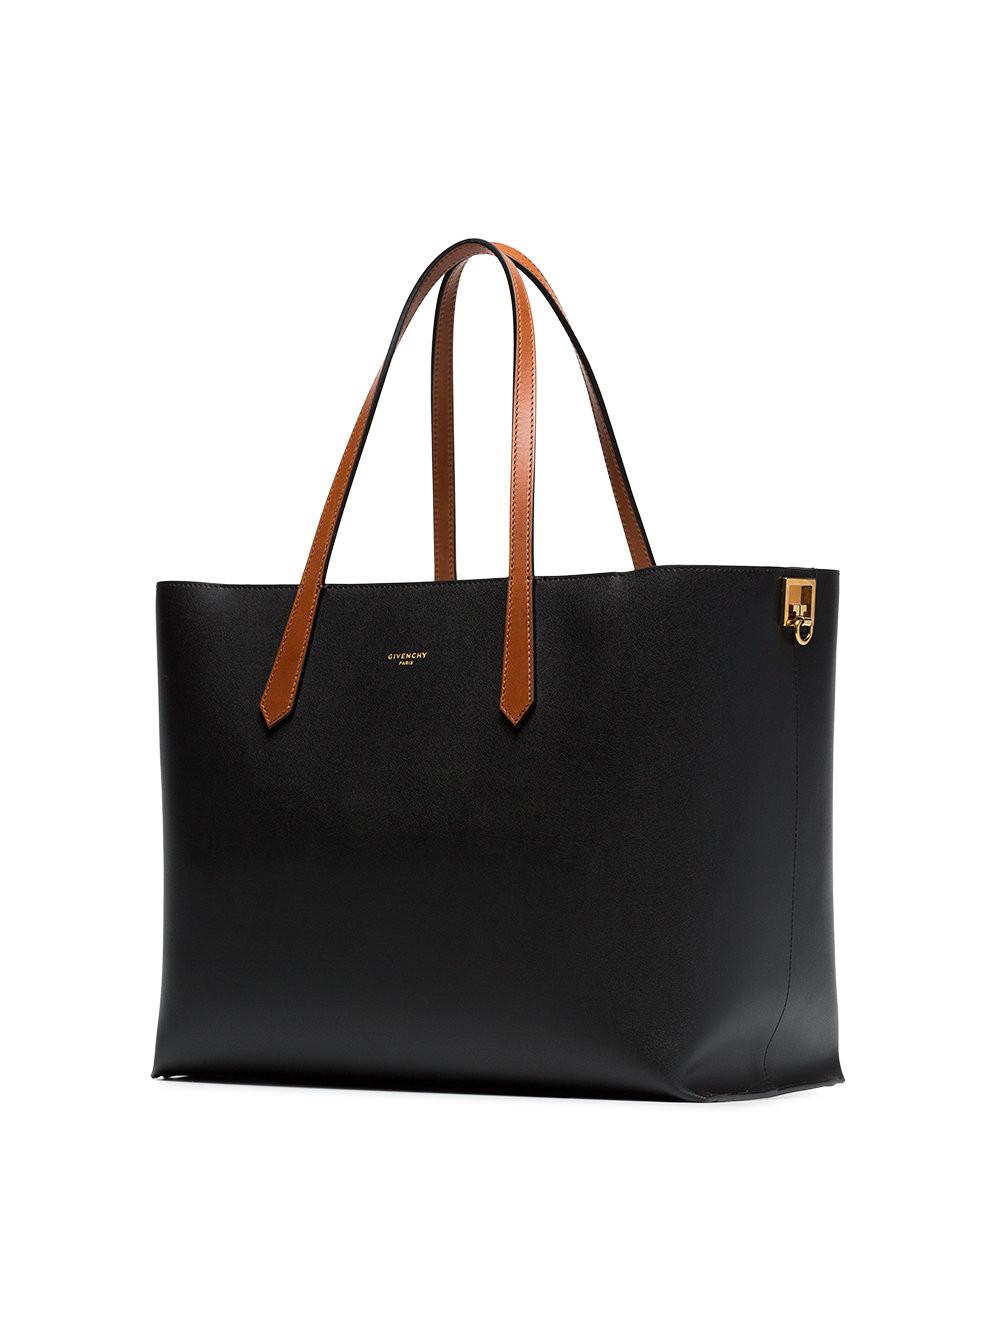 Givenchy Leather Black Gv Shopper Tote | Lyst